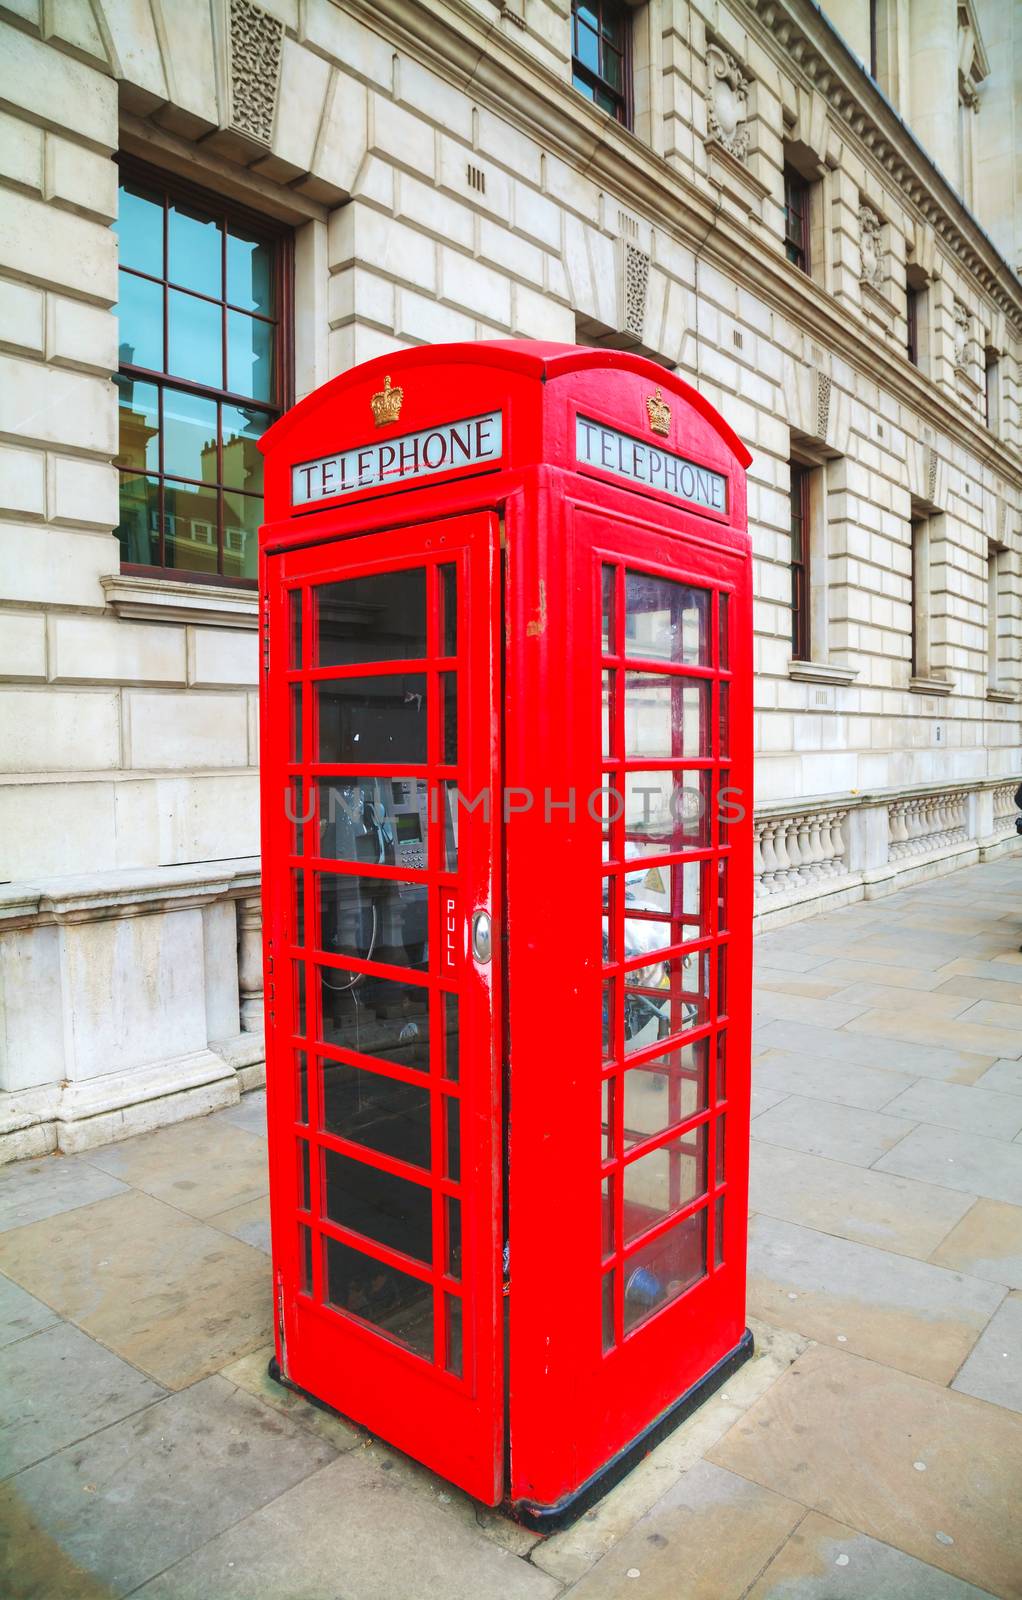 Famous red telephone booth in London by AndreyKr